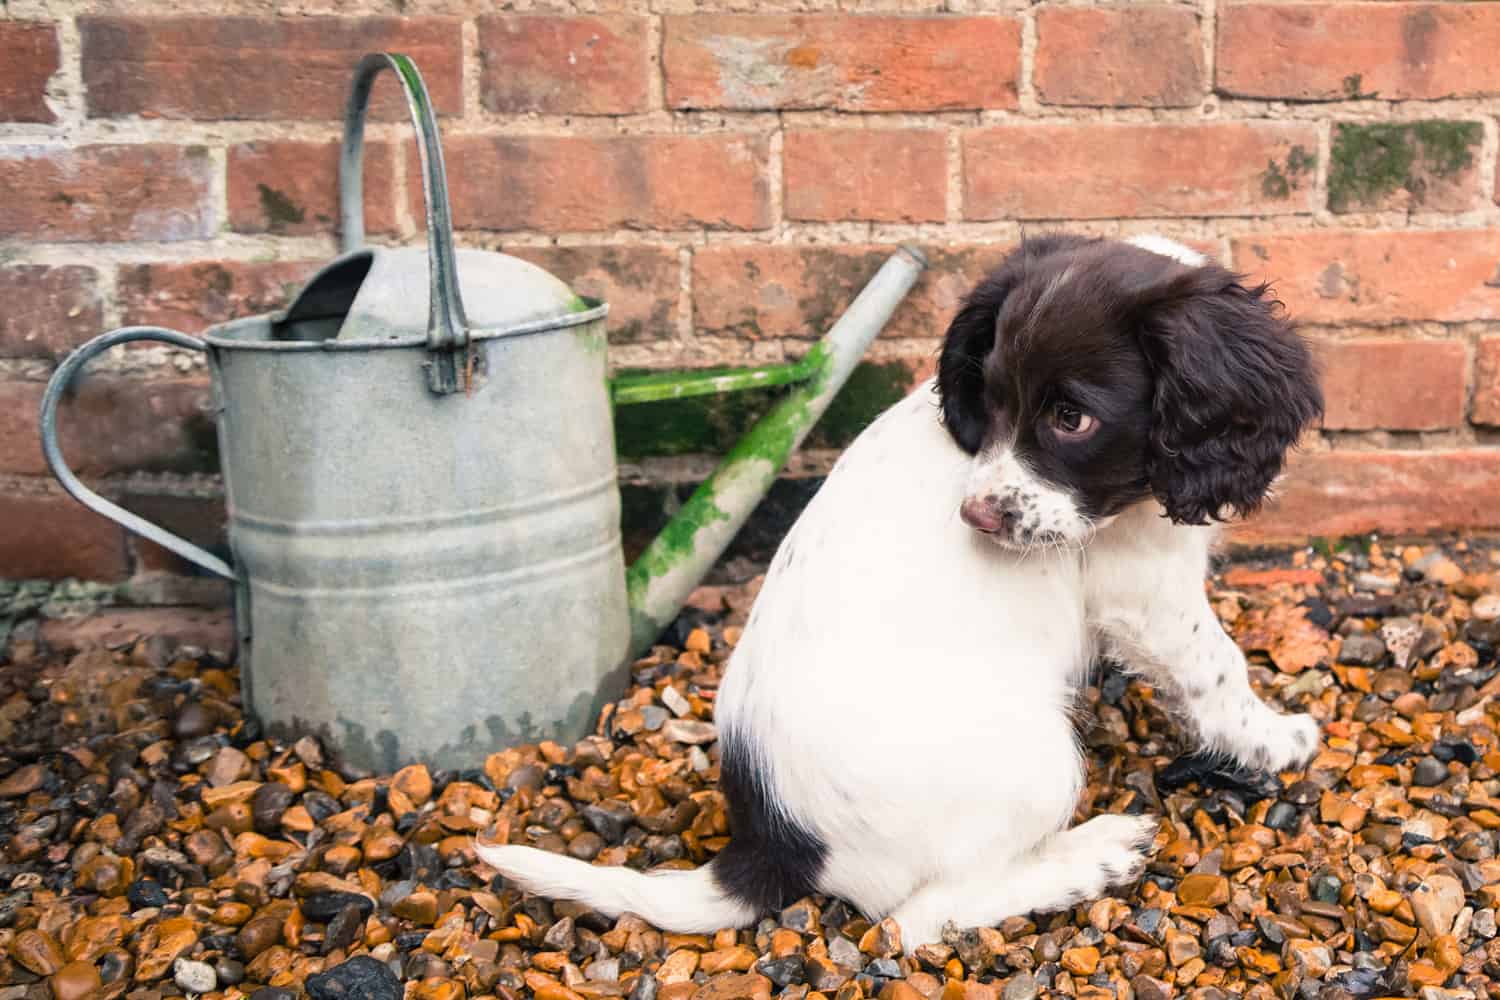 A cute puppy spaniel sitting by a watering can that is the same size as it. There is an old brick wall behind and the puppy is sitting on pebbles looking over his shoulder.